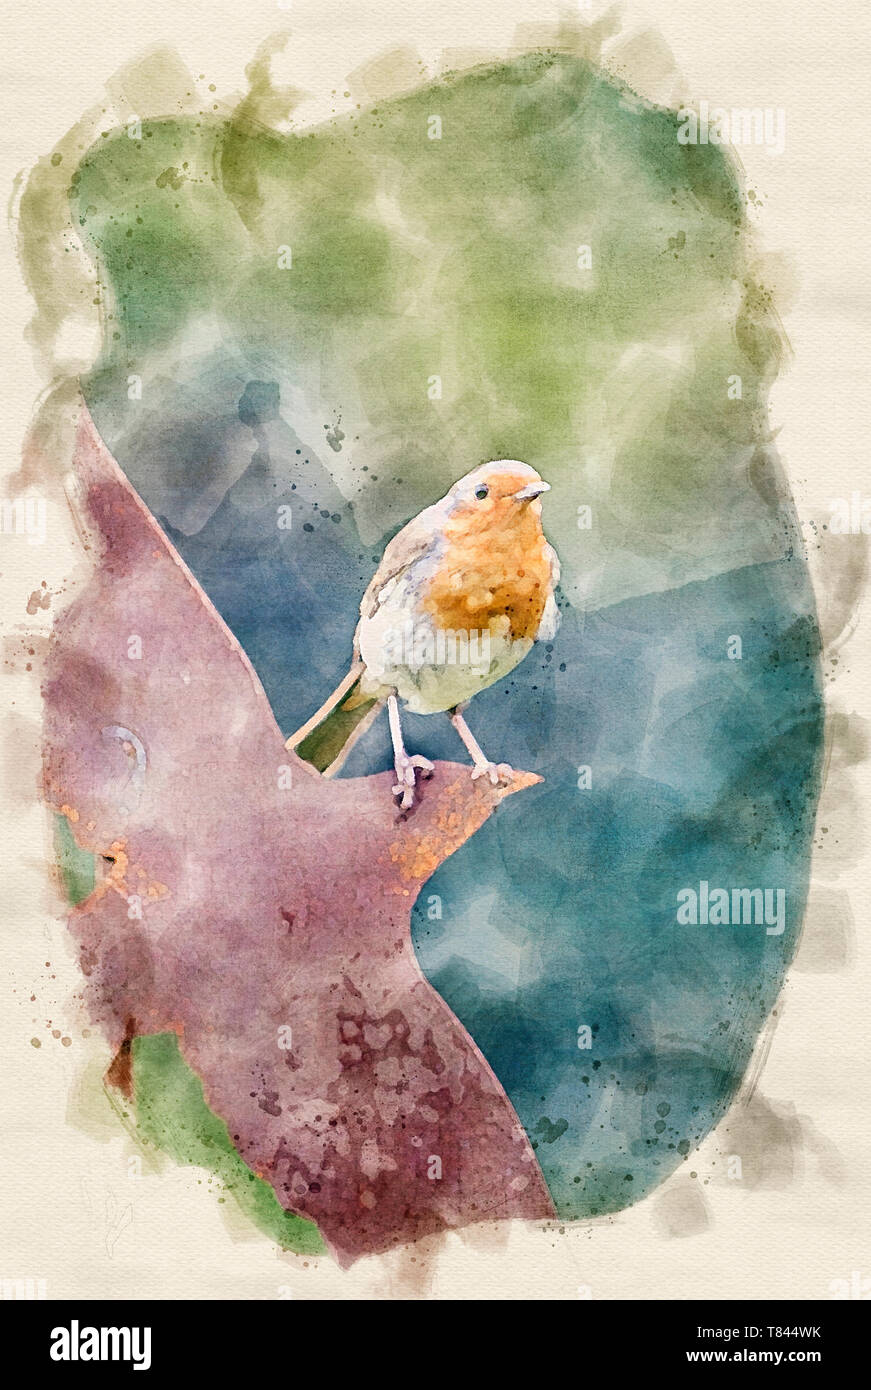 Watercolour effect from a photograph of a Robin Stock Photo